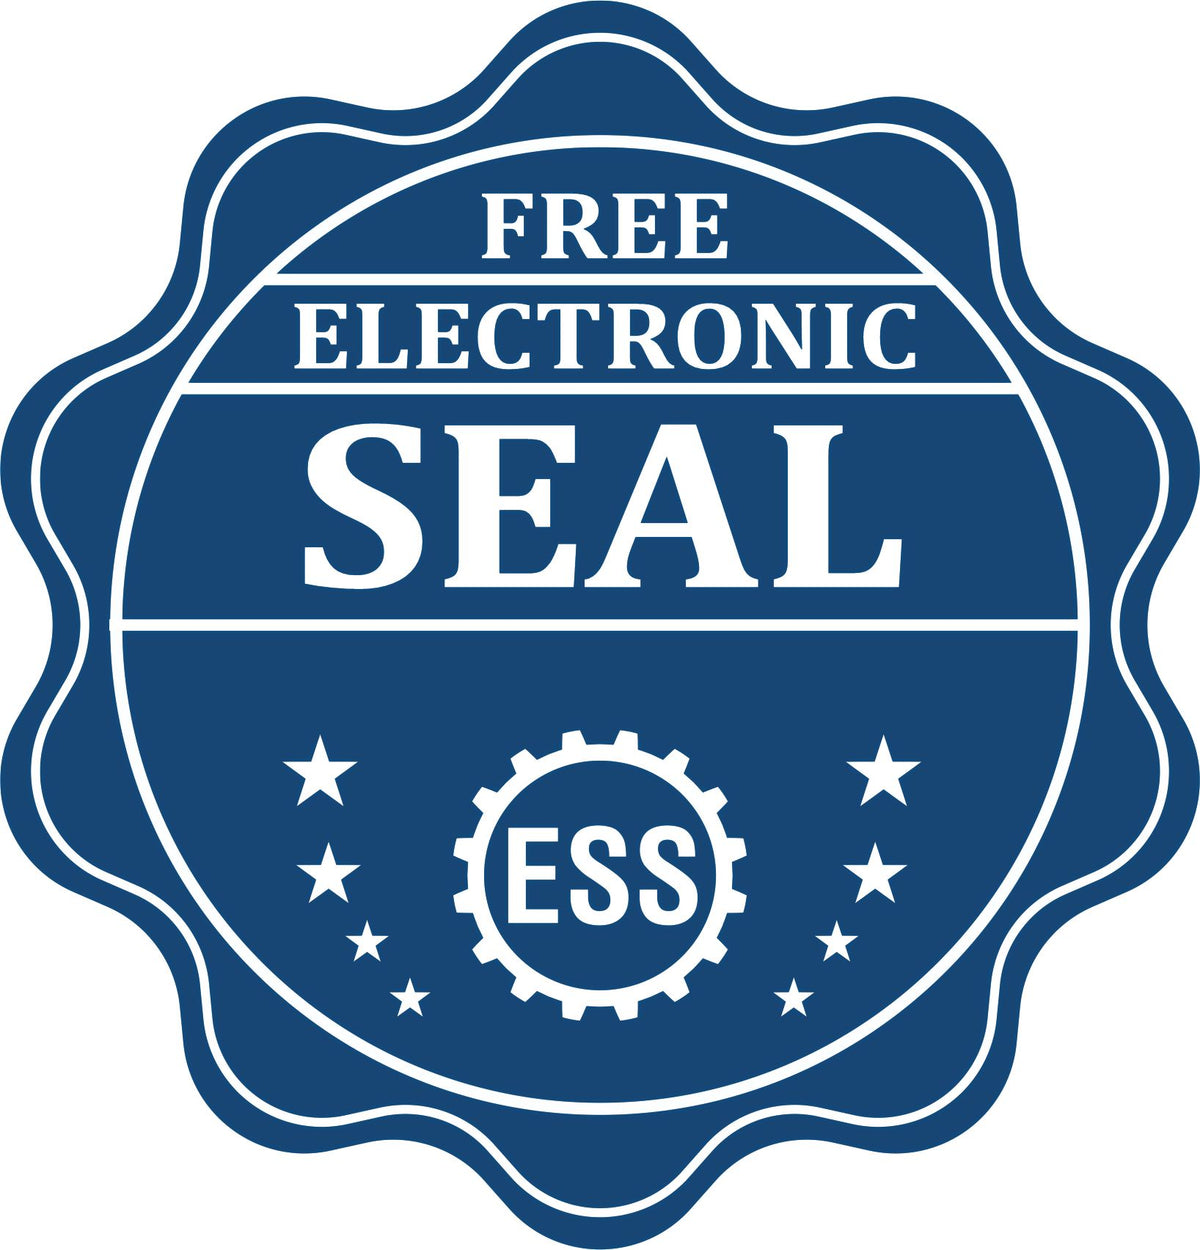 A badge showing a free electronic seal for the Hybrid Colorado Land Surveyor Seal with stars and the ESS gear on the emblem.